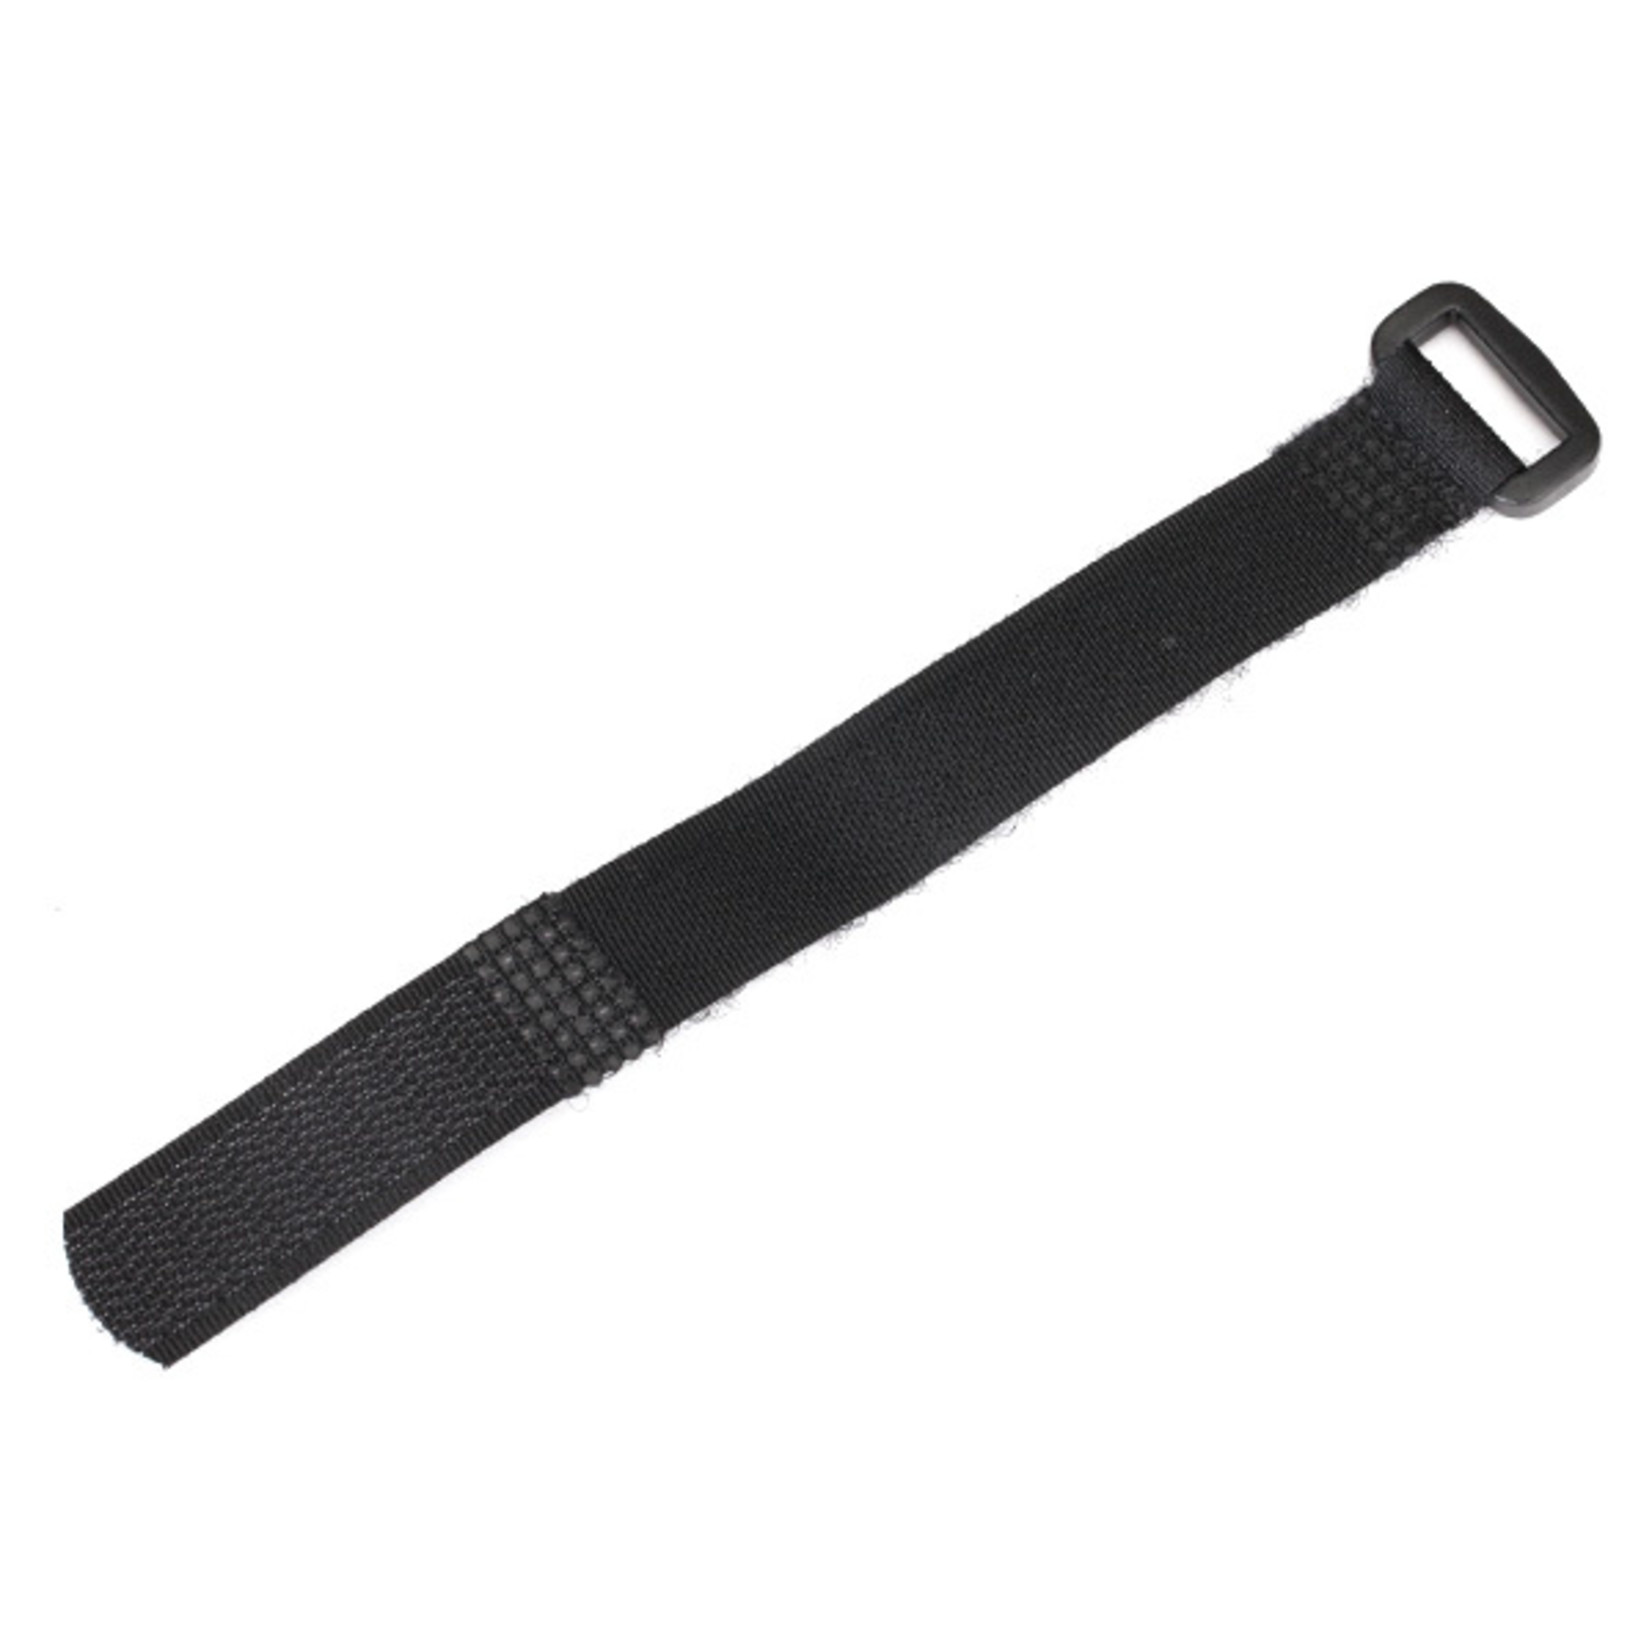 Traxxas 8222 - Battery strap (for use with 2200mAh 2-cell